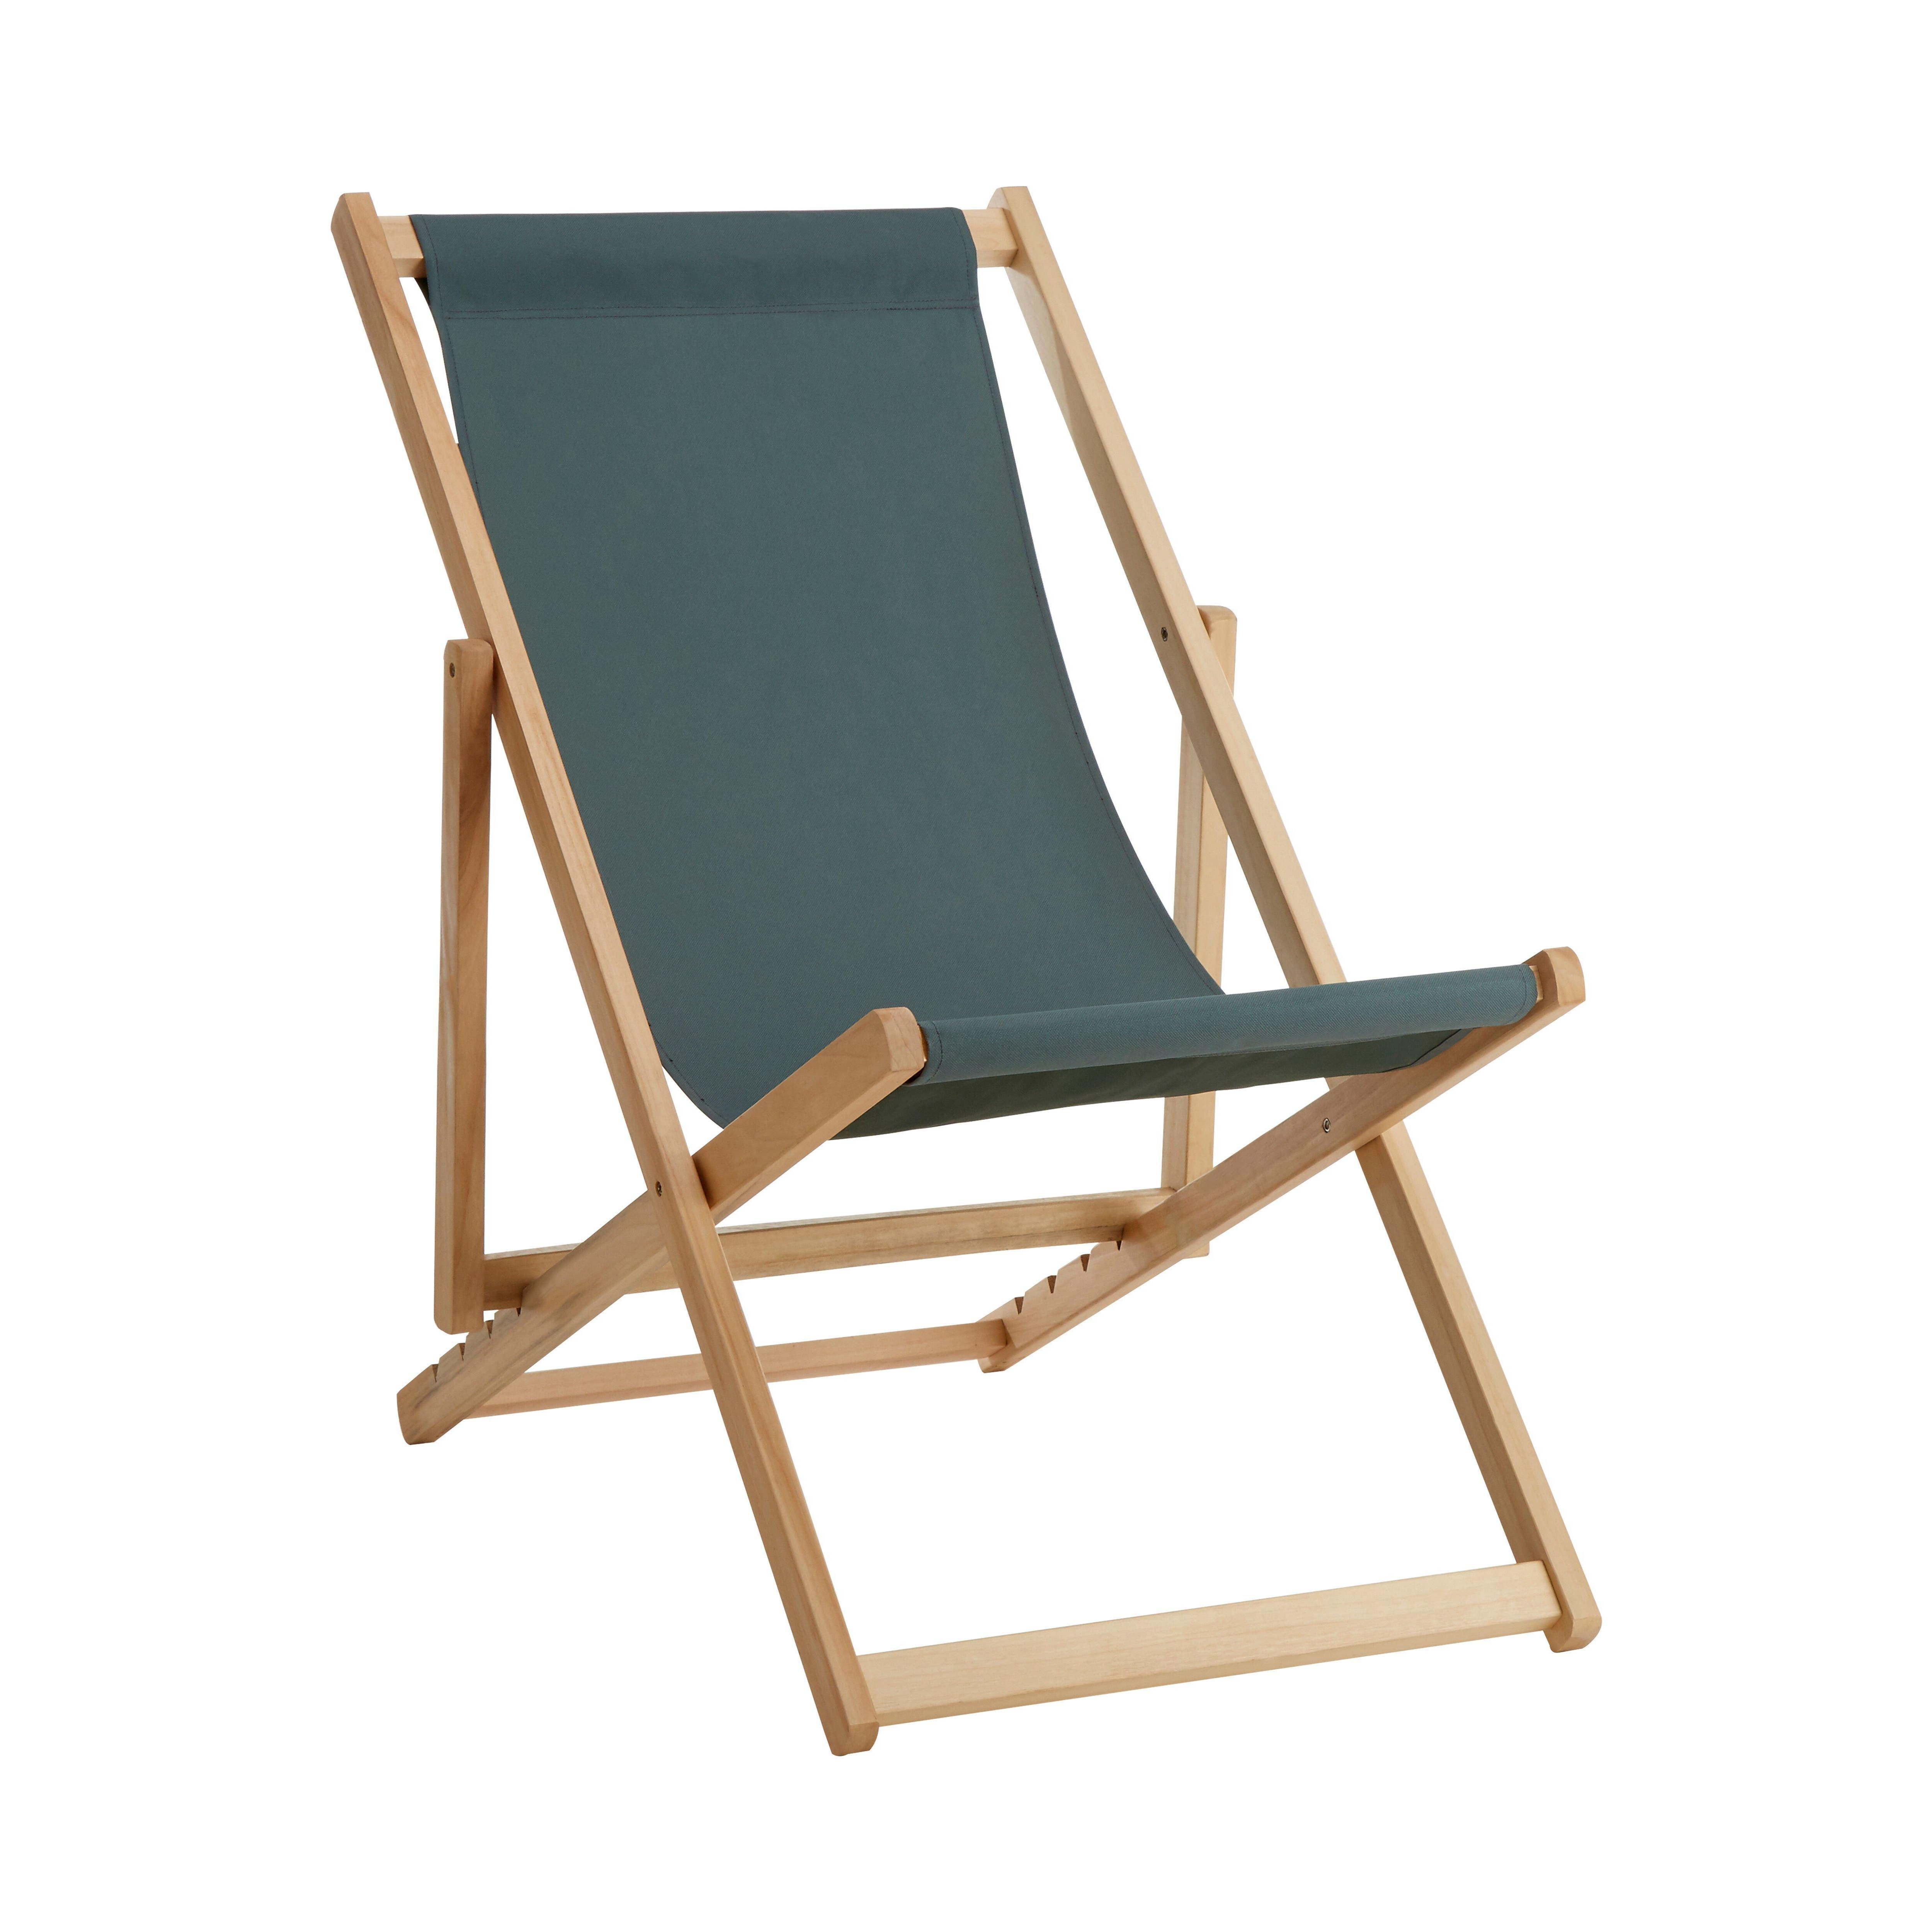 Ethically Sourced Stylish Deckchair - image 1